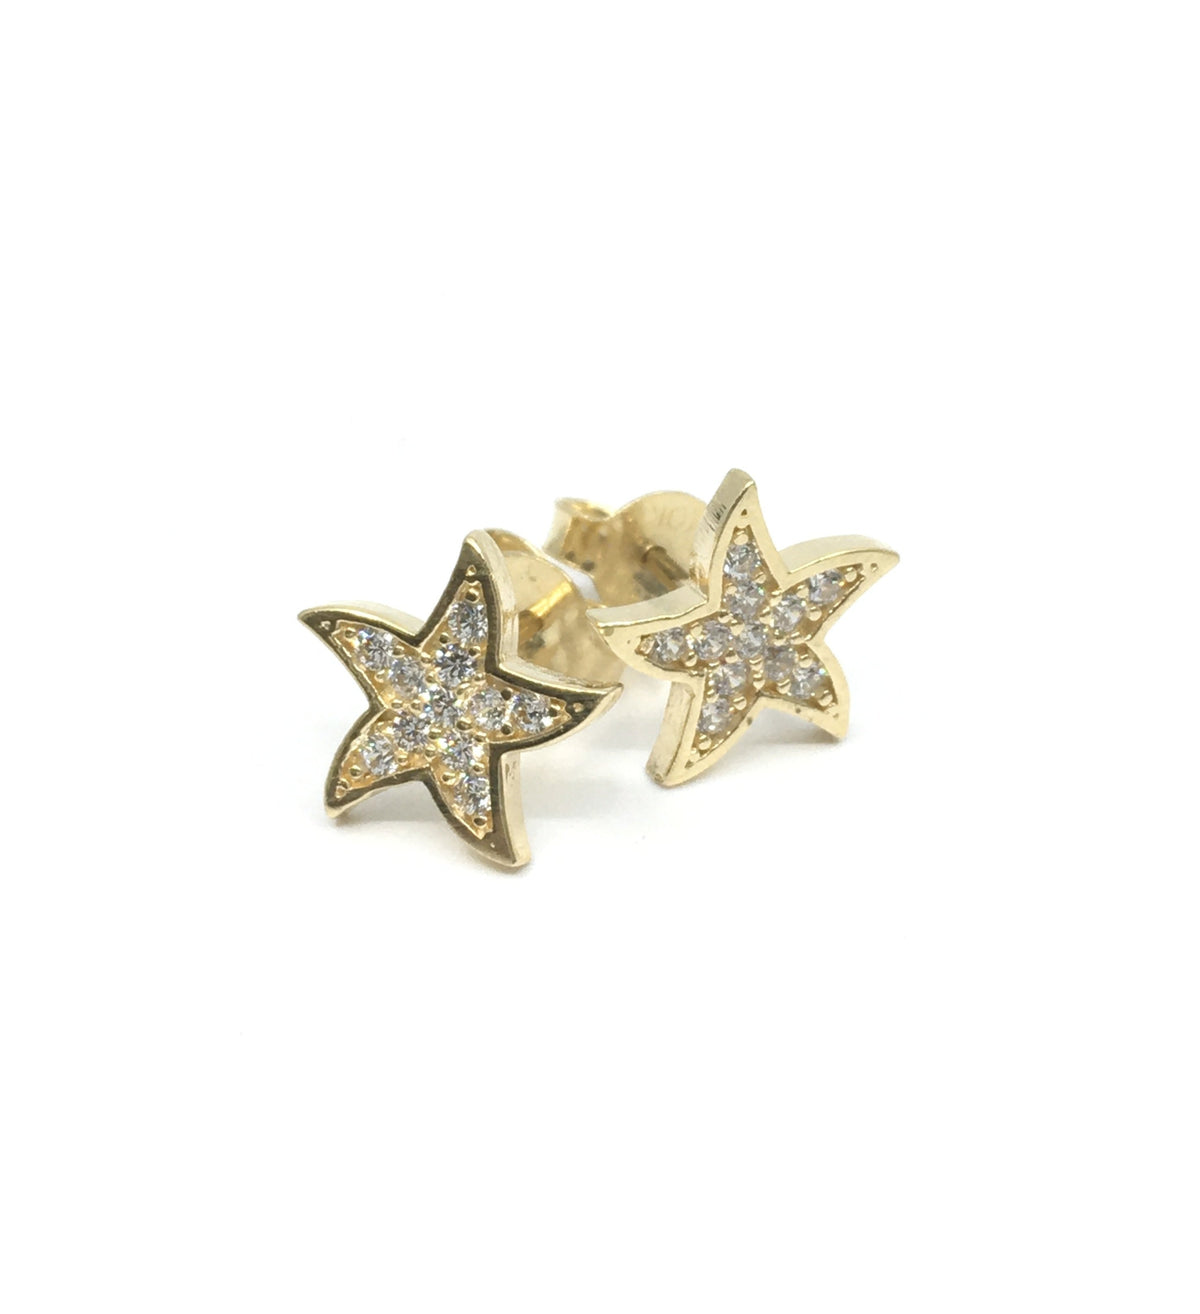 10K Yellow Gold Starfish with Cubic Zirconia Earrings